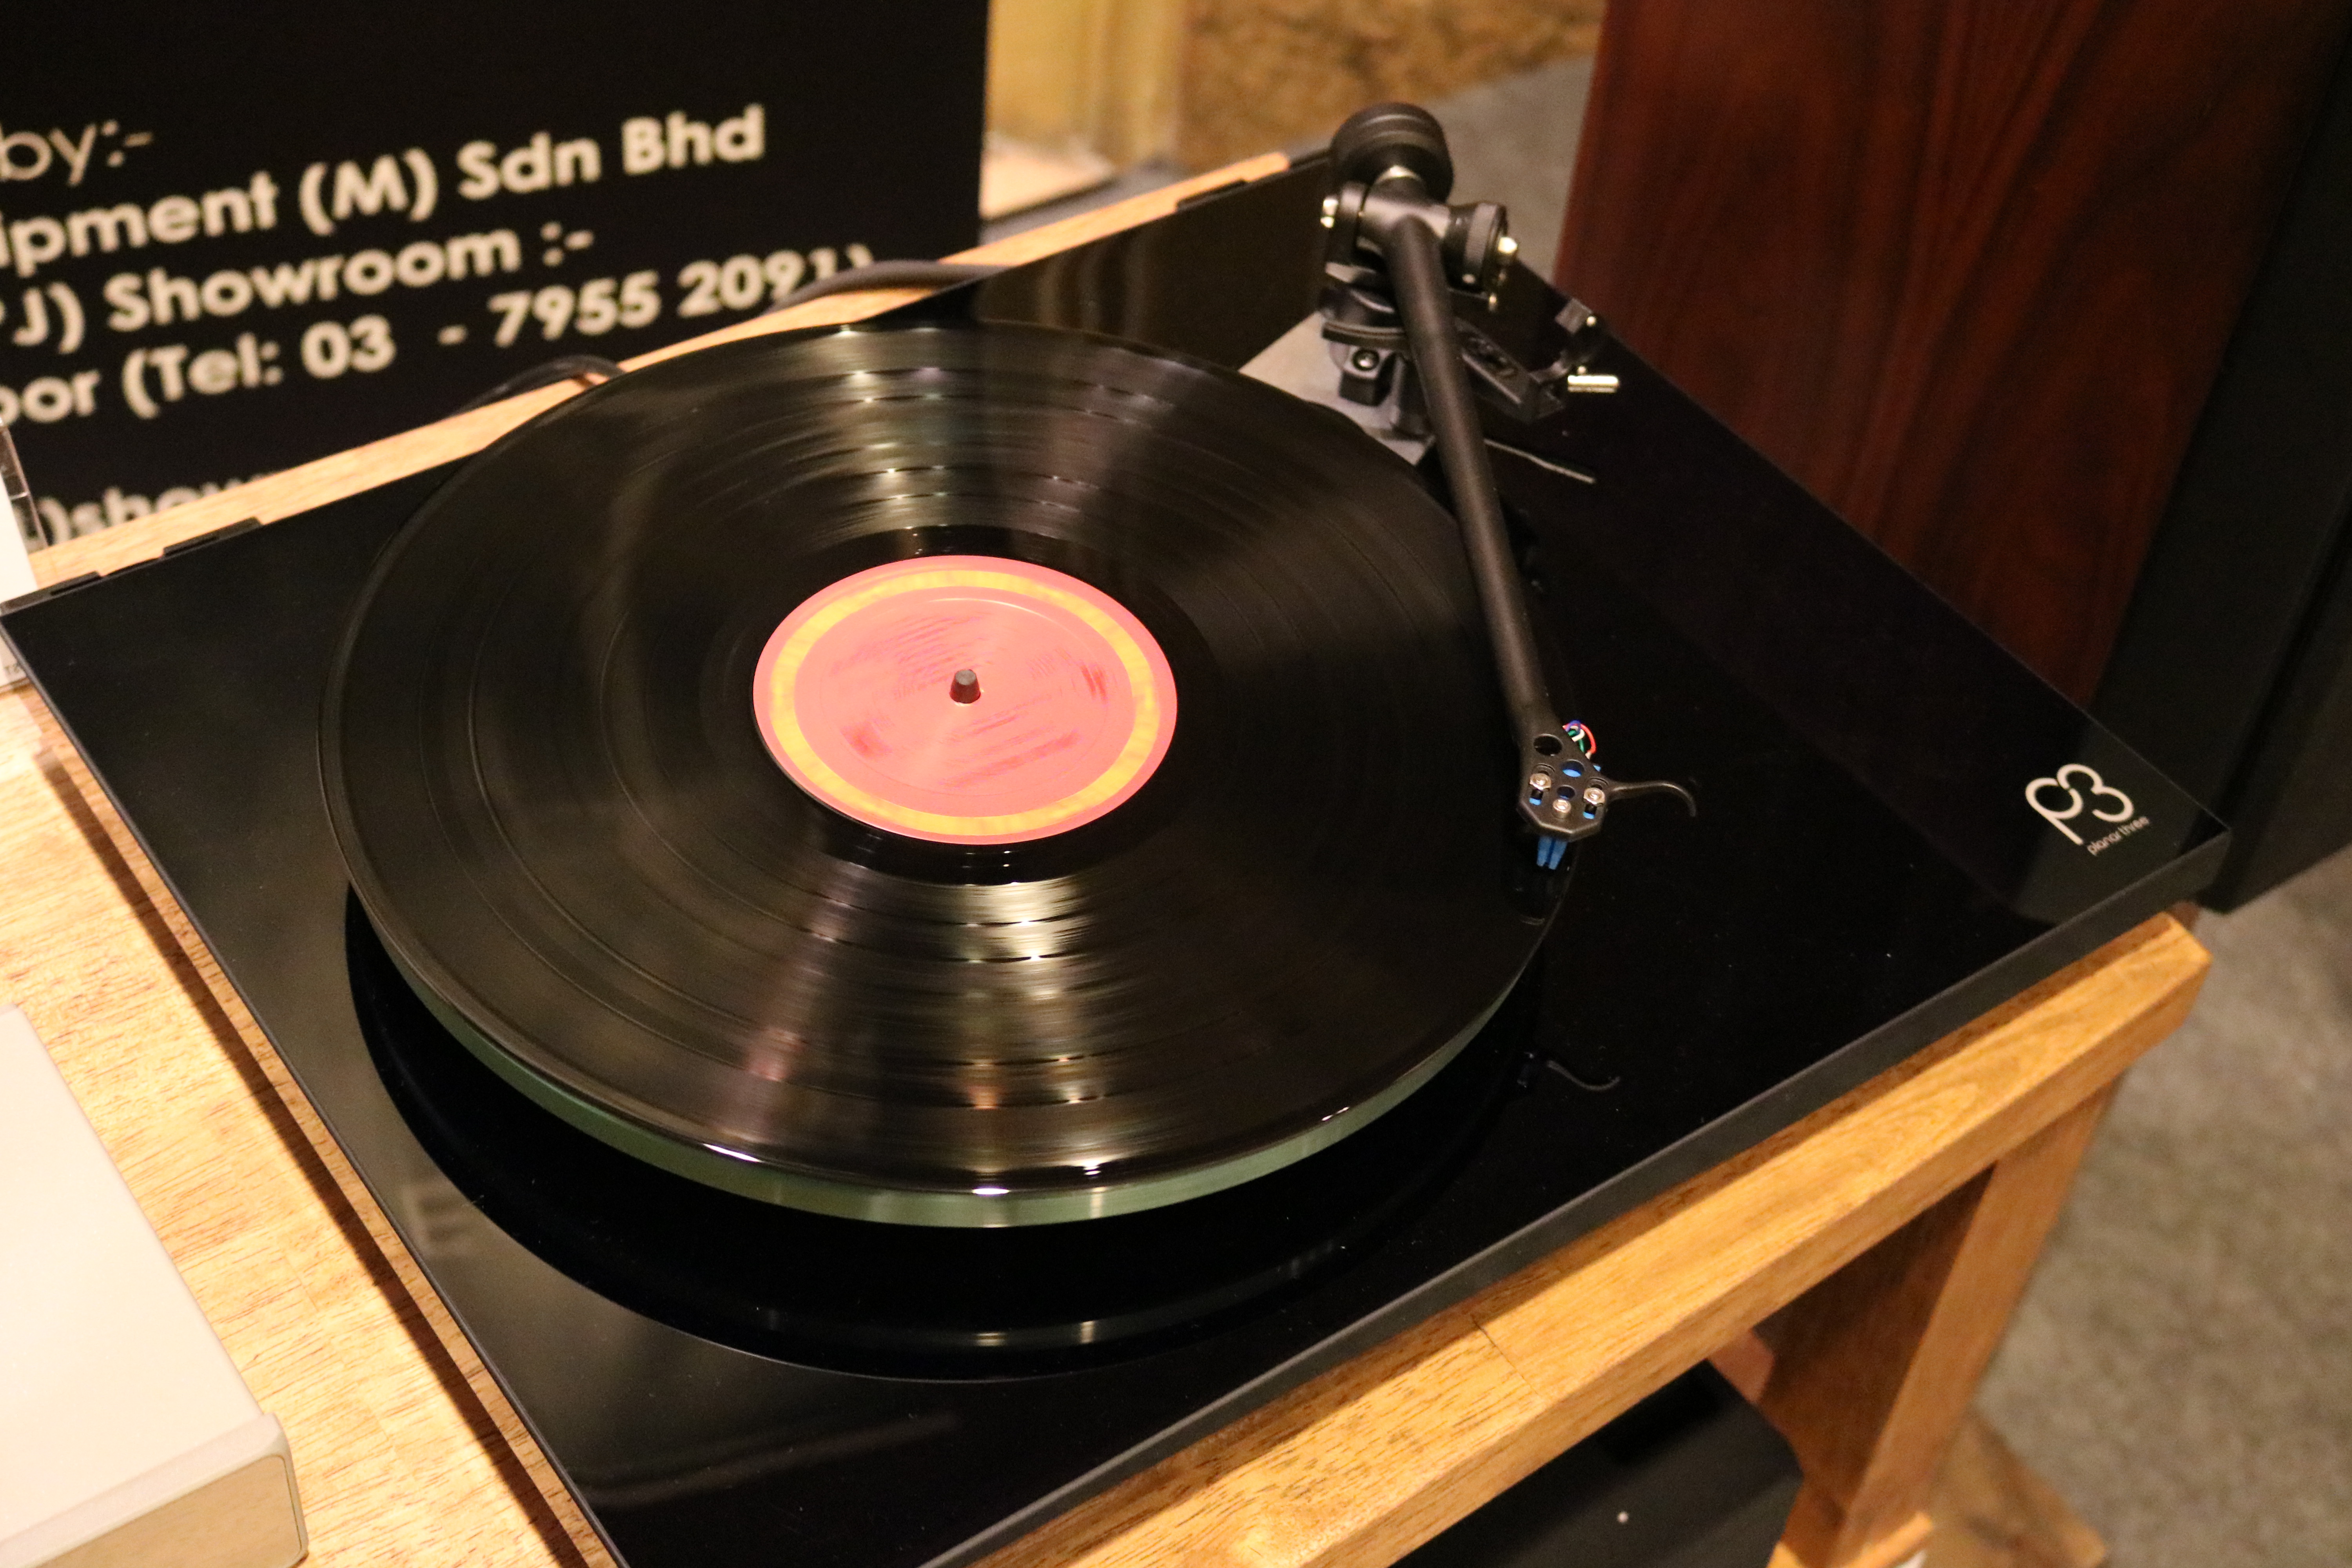 The new Planar 3 turntable from Rega which replaces the RP3.